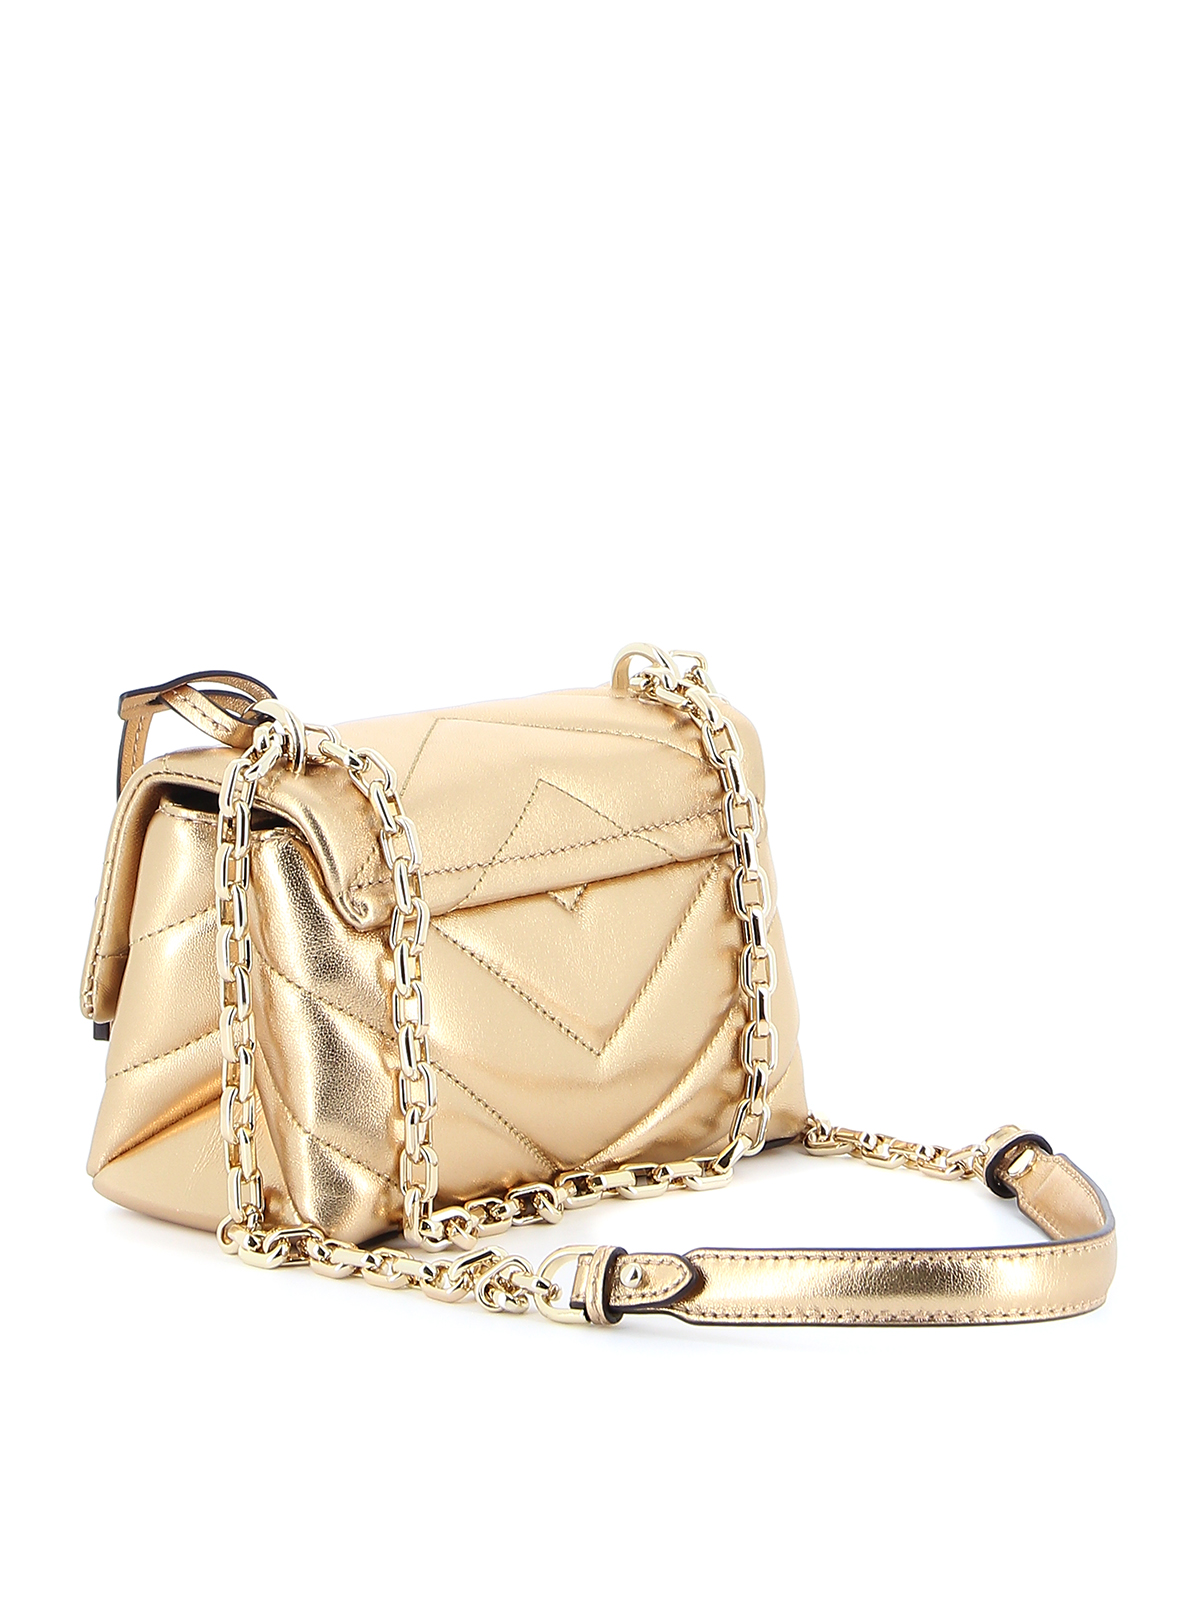 michael kors small quilted bag